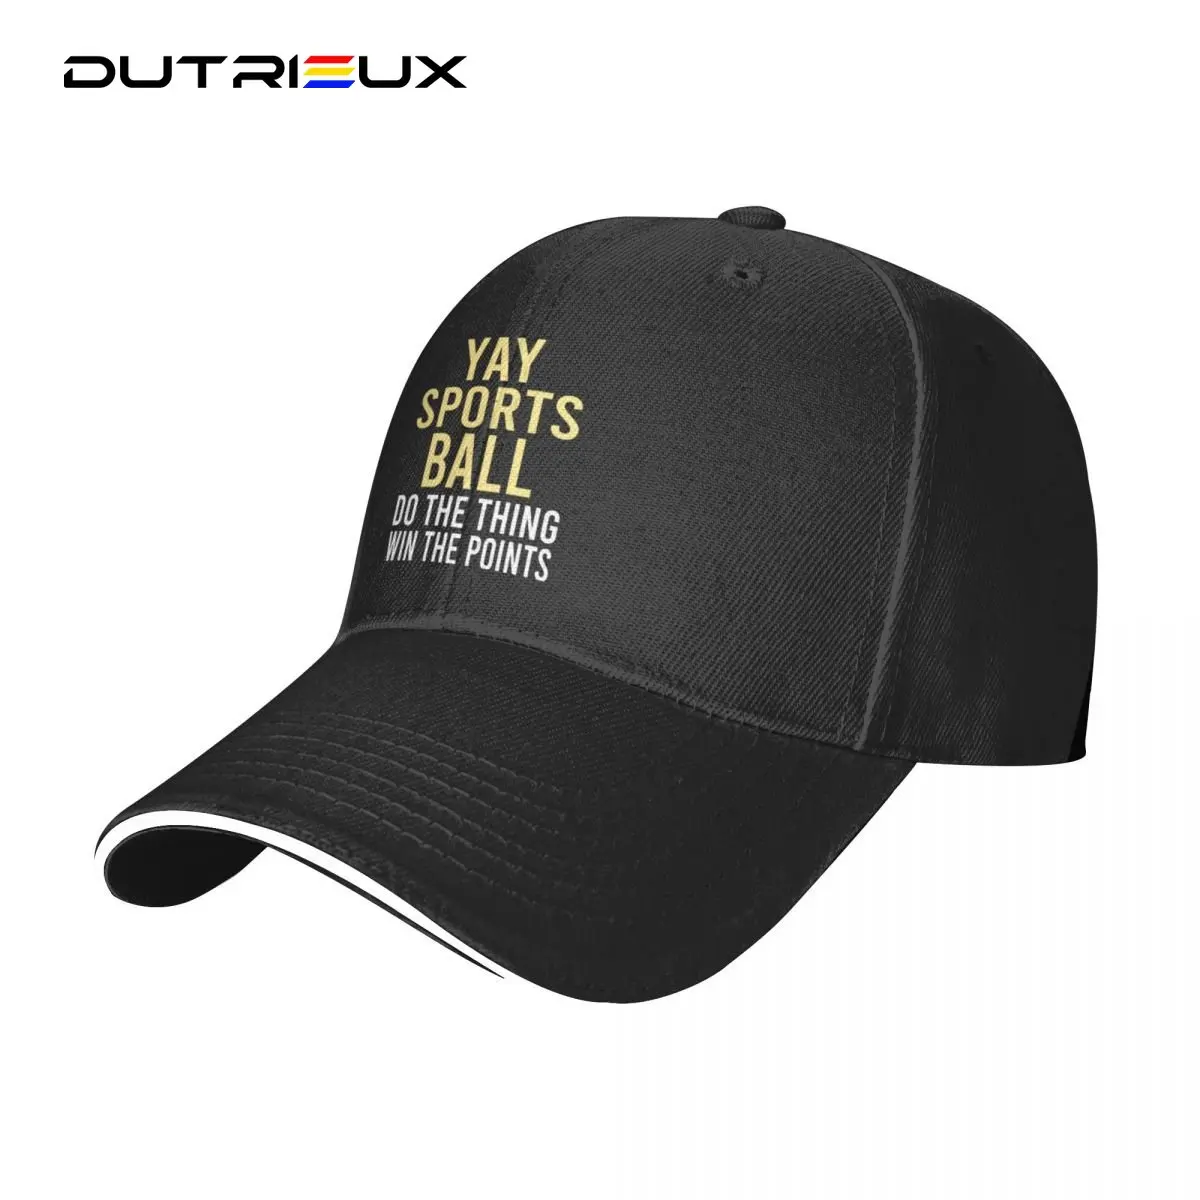 

Baseball Hat For Men Women Yay Sportsball Do The Thing Win The Points Essential T-Shirt Cap Fashion Beach Hat For Girls Men's